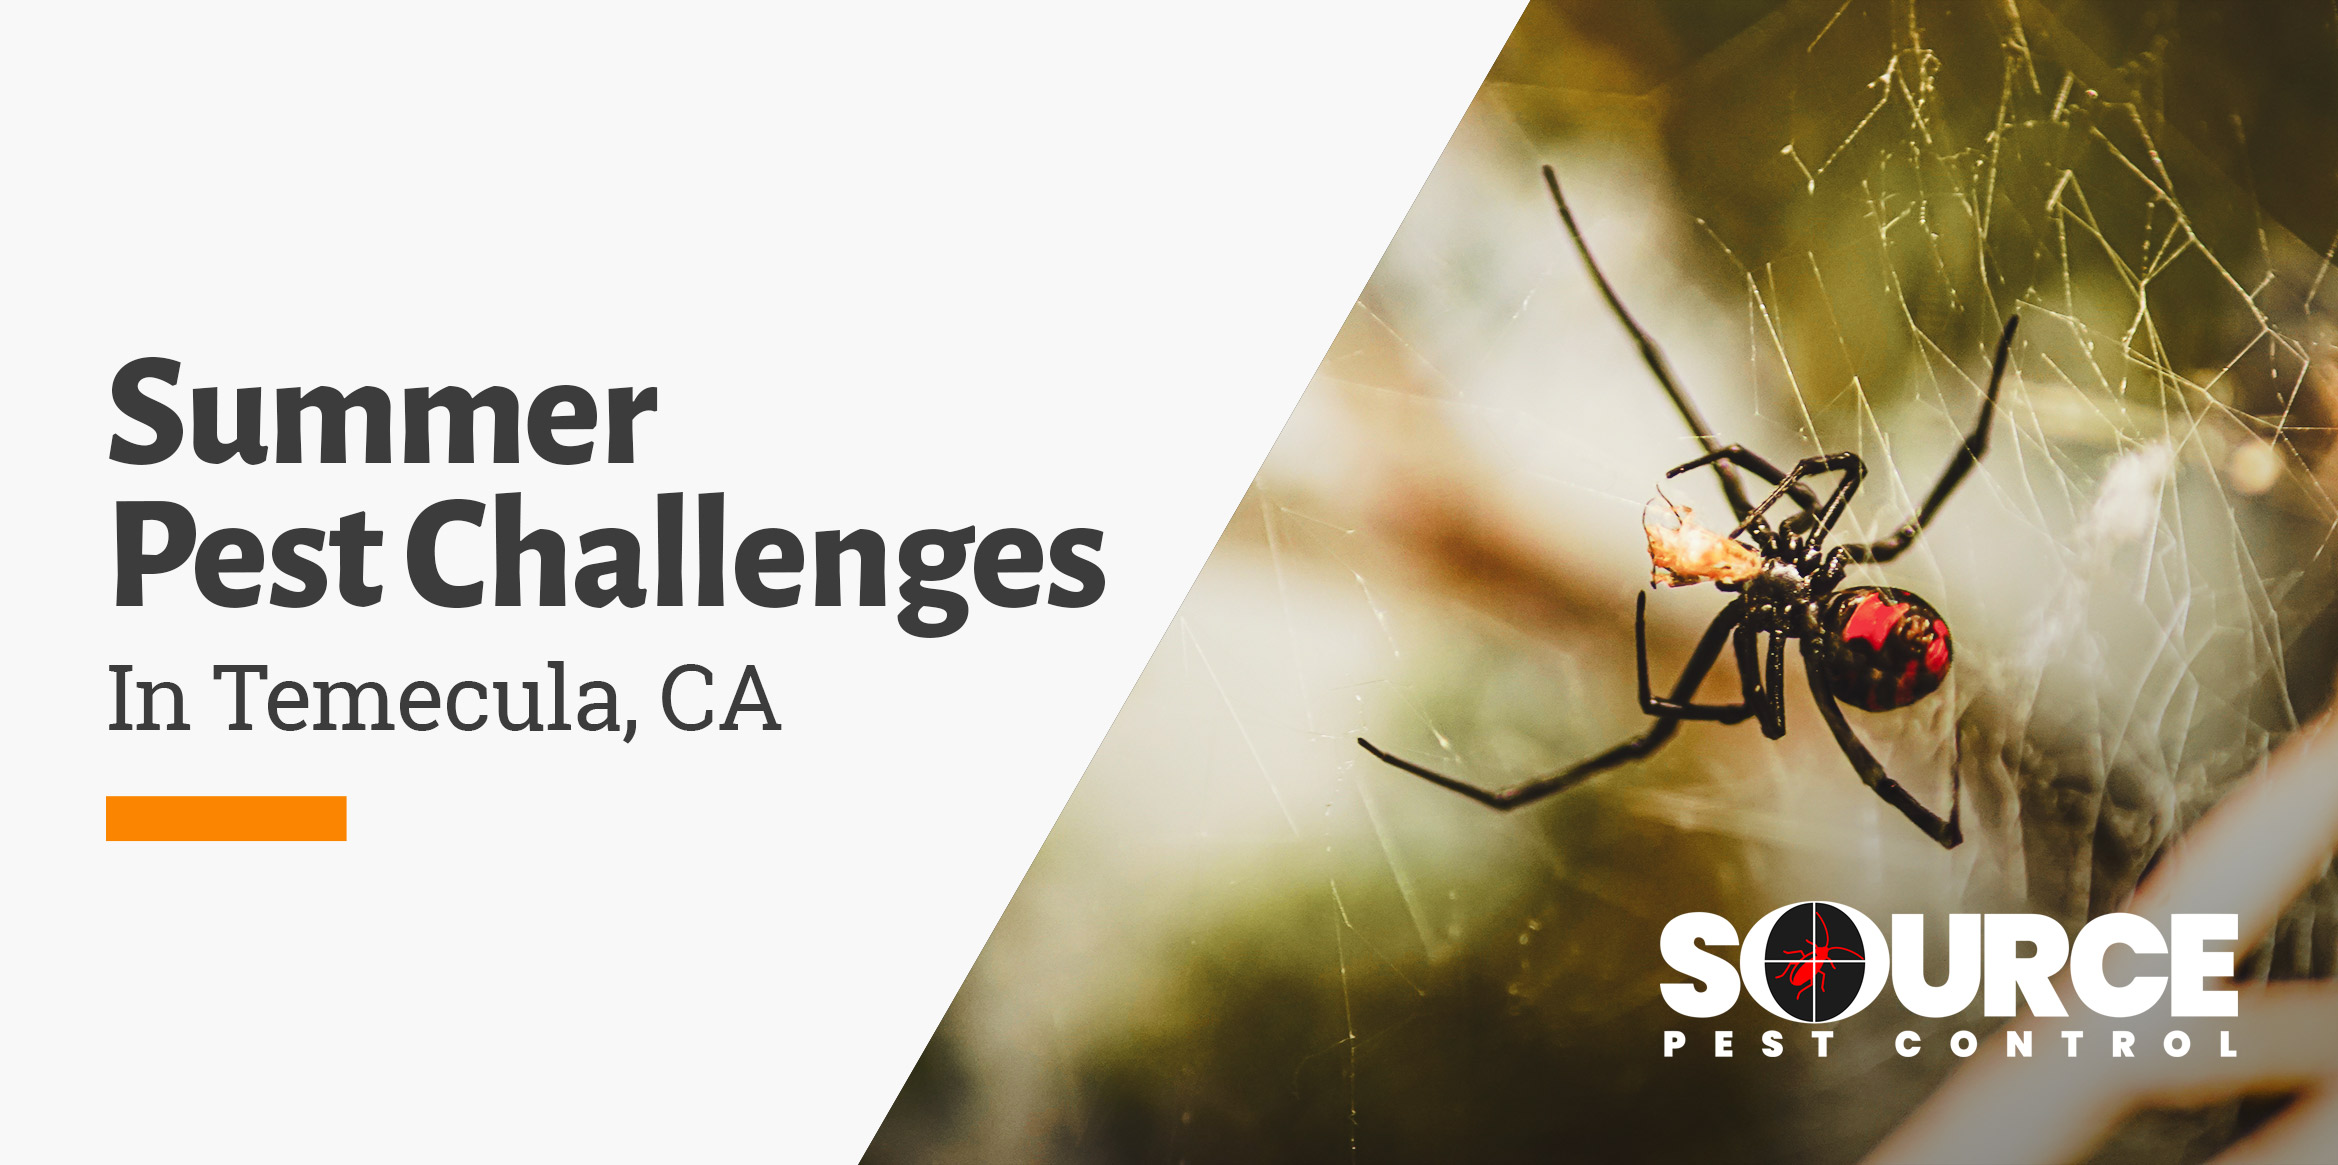 Summer Pest Challenges in Temecula